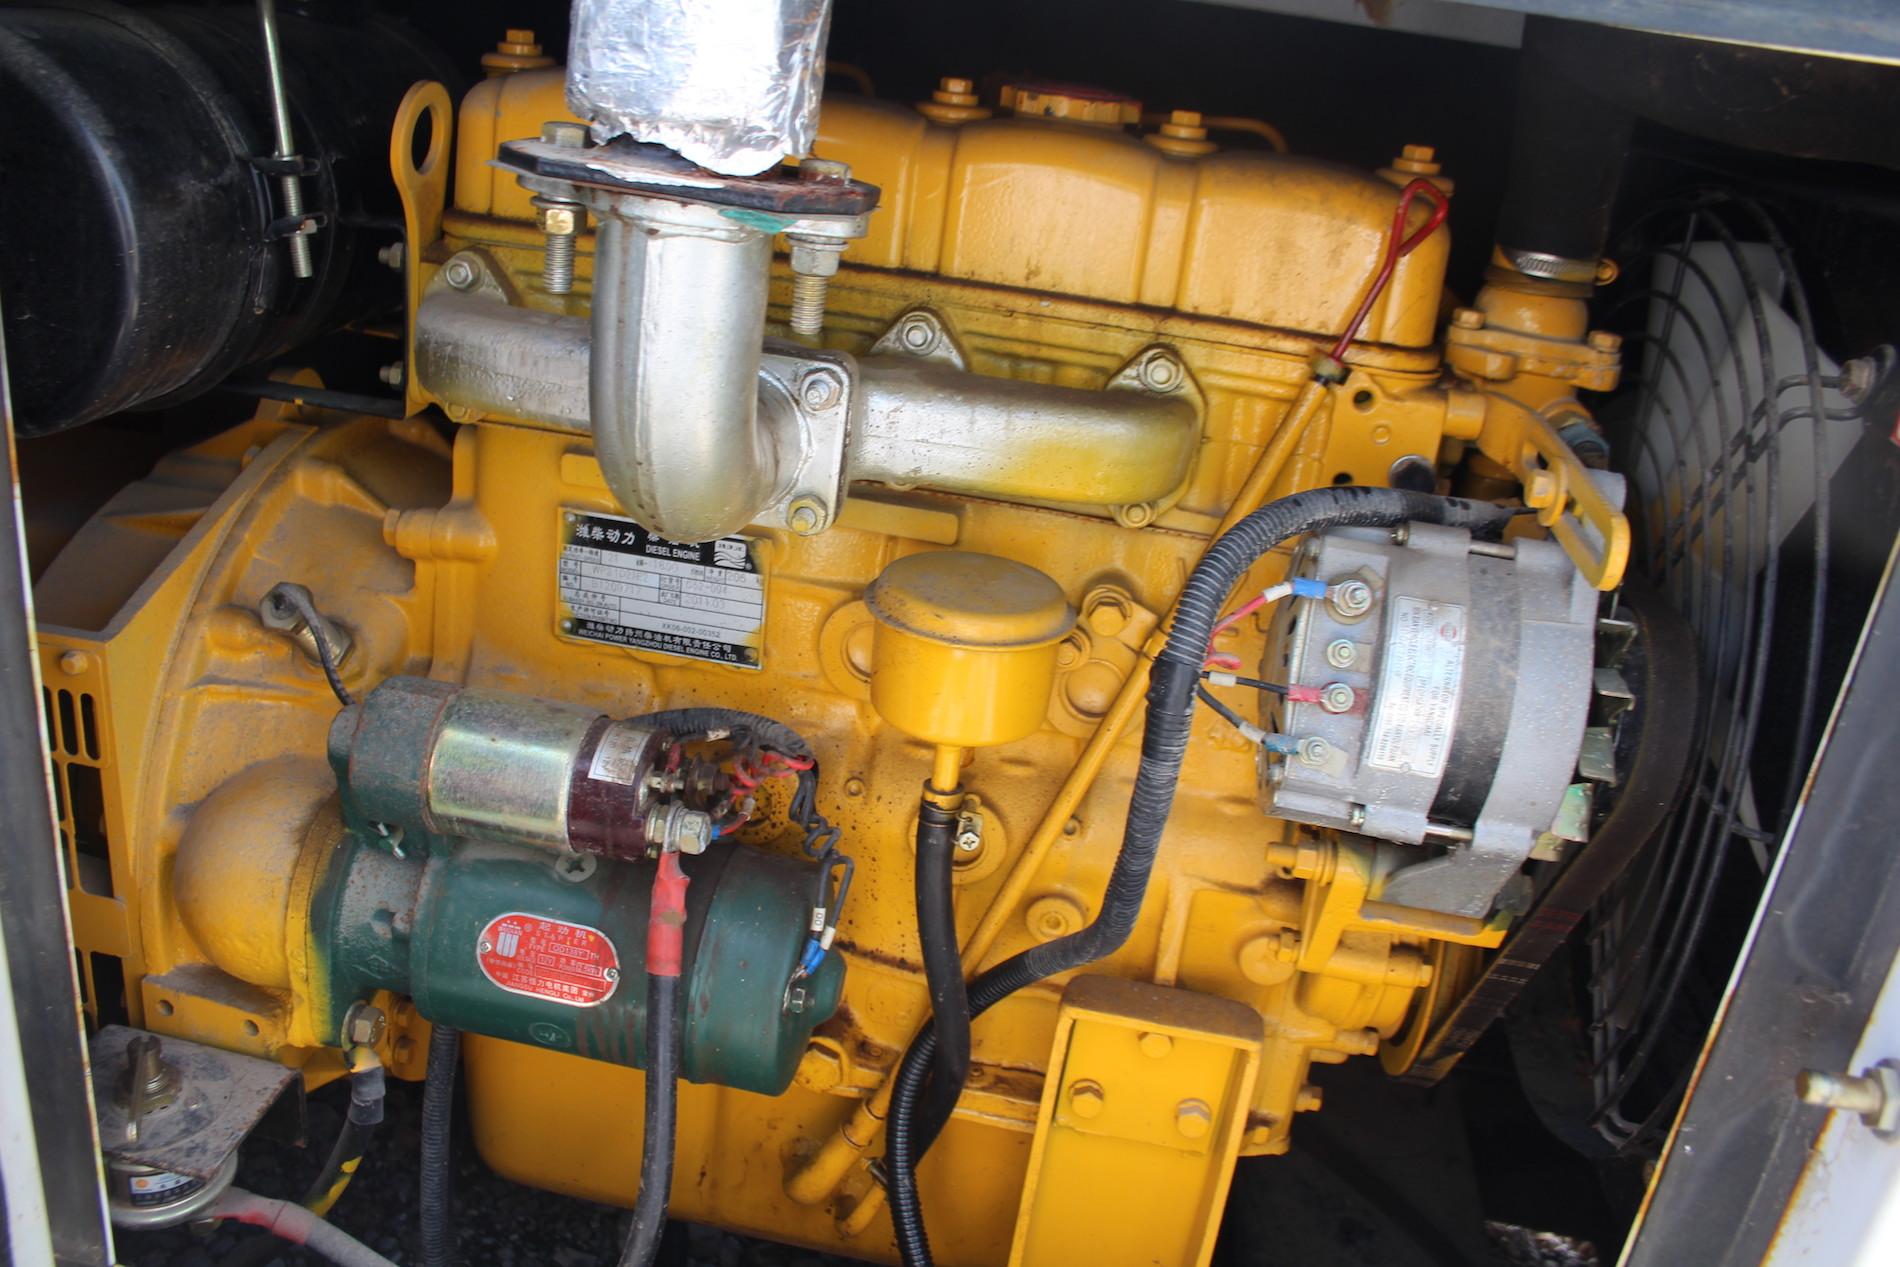 22 kVA Diesel Generator with Transfer Switch